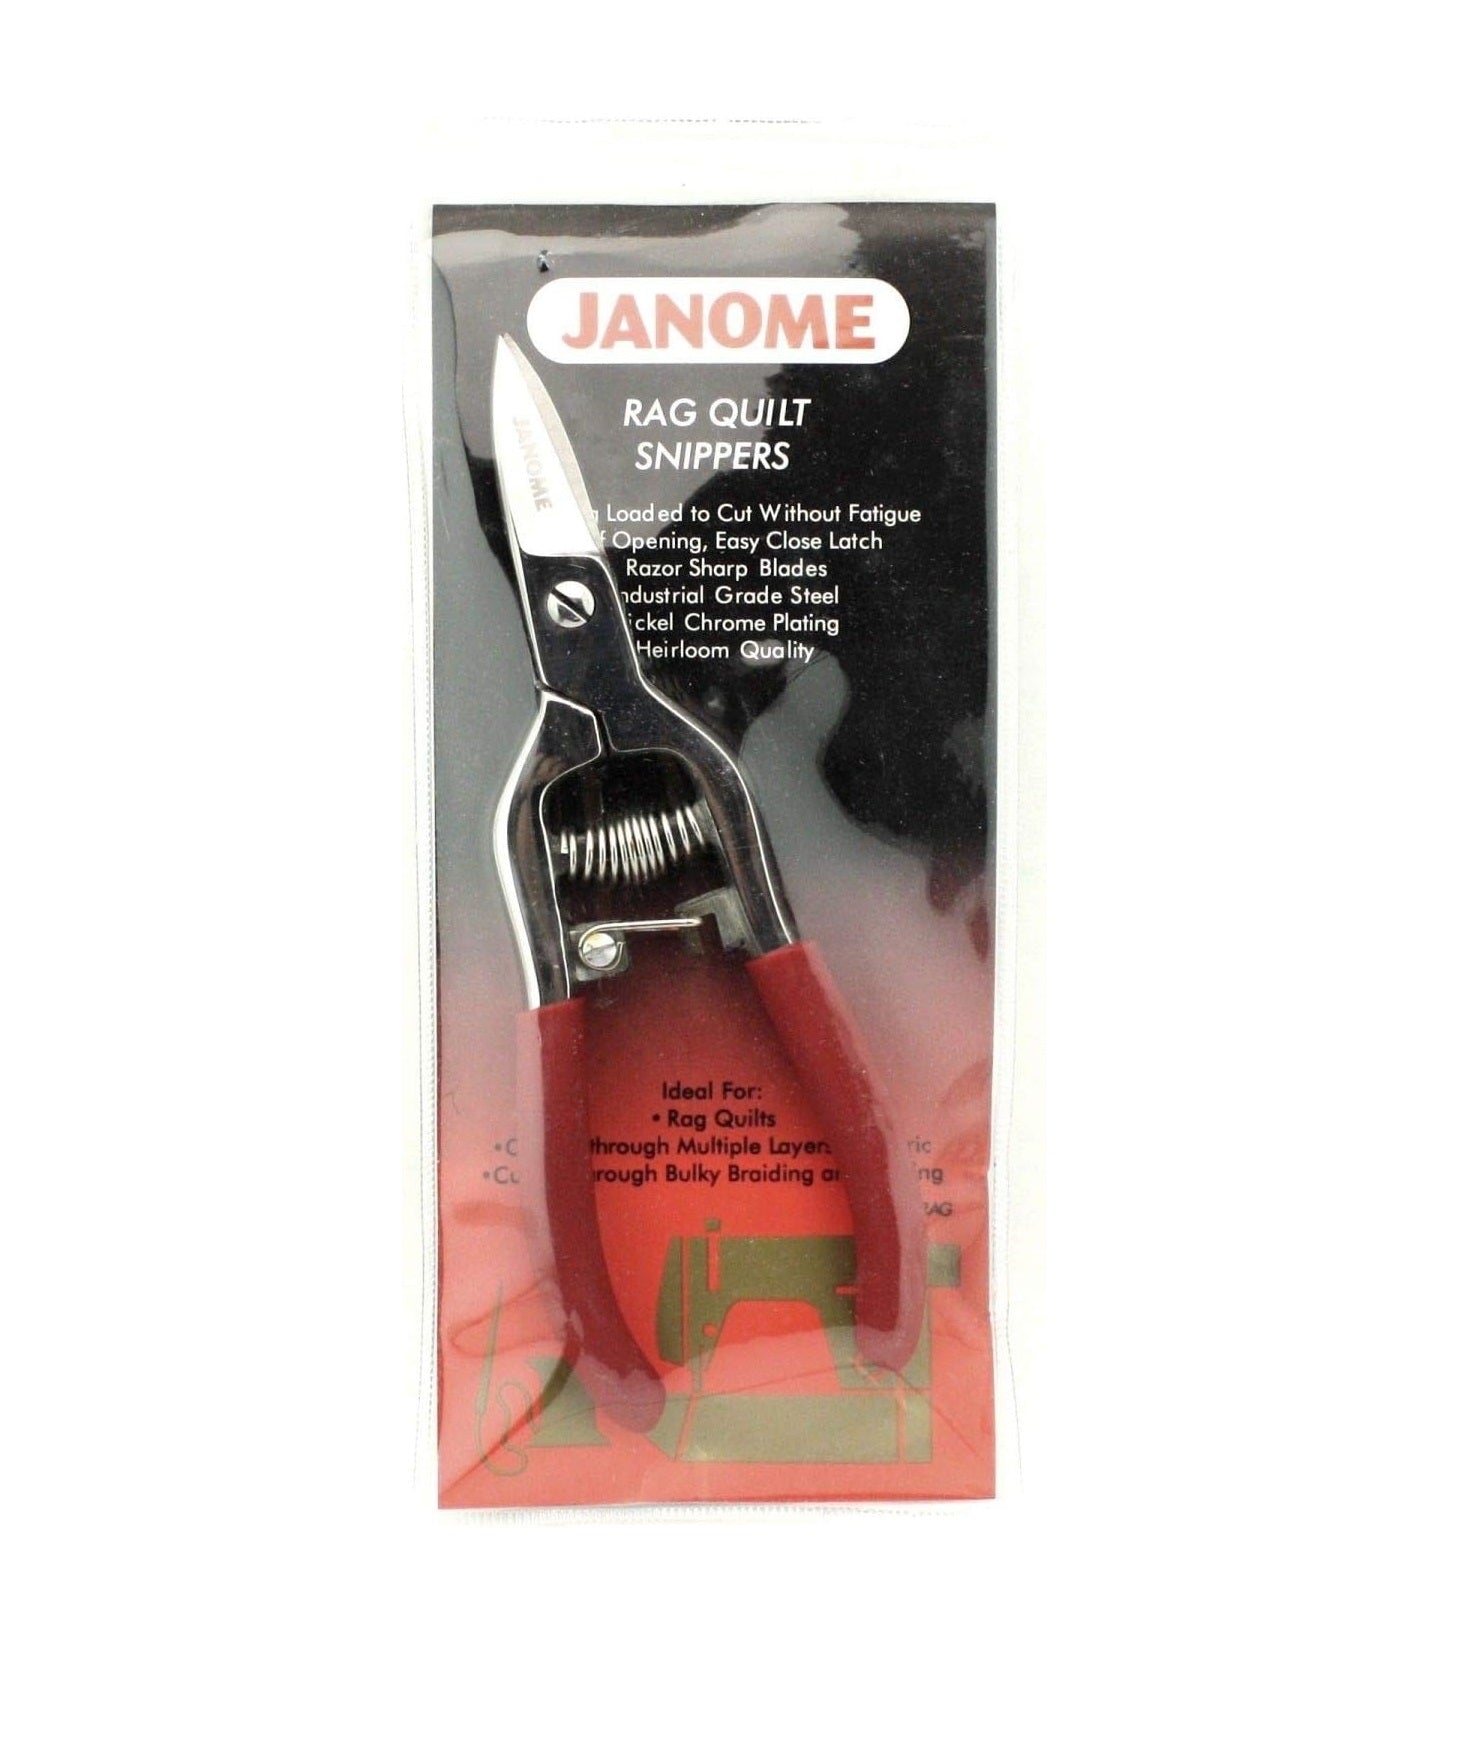 Janome Rag Quilt Snippers for Sale at World Weidner